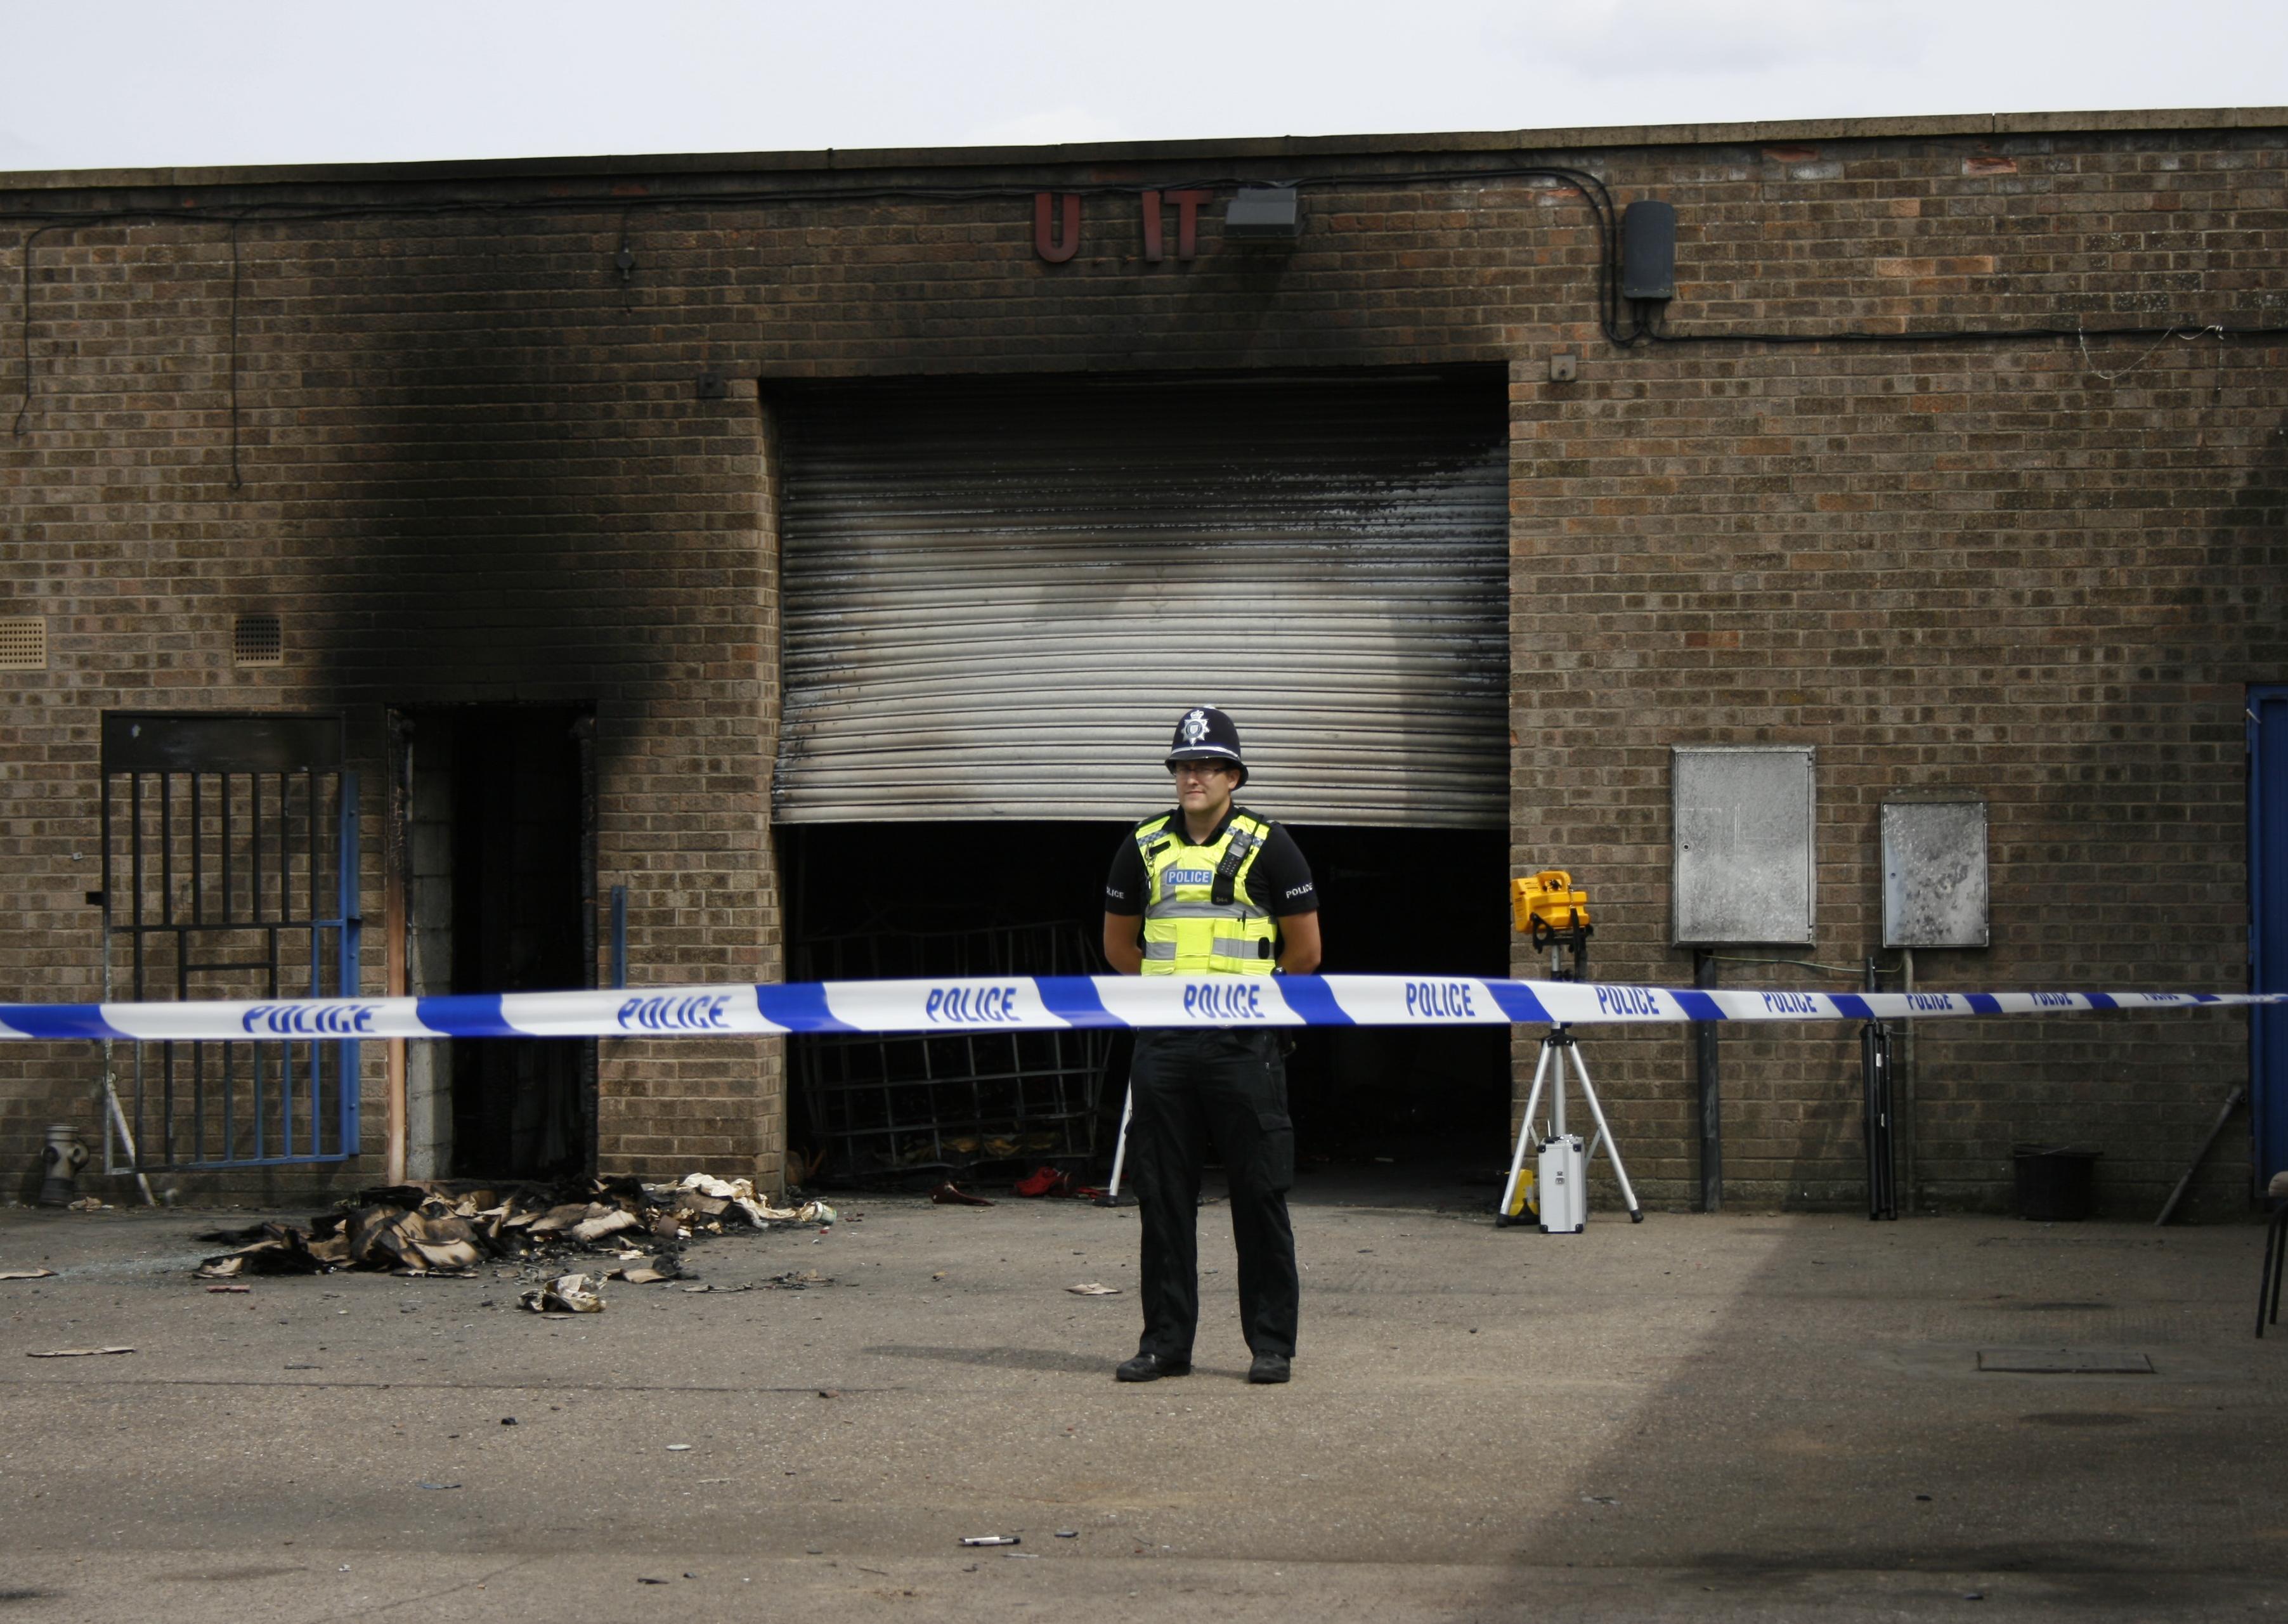 An explosion at an illegal vodka distilling operation at Boston's Broadfield Lane Industrtial Estate in 2011 left five dead and one seriously injured. A lit cigarette was later revealed to be the most likely cause of the incident.